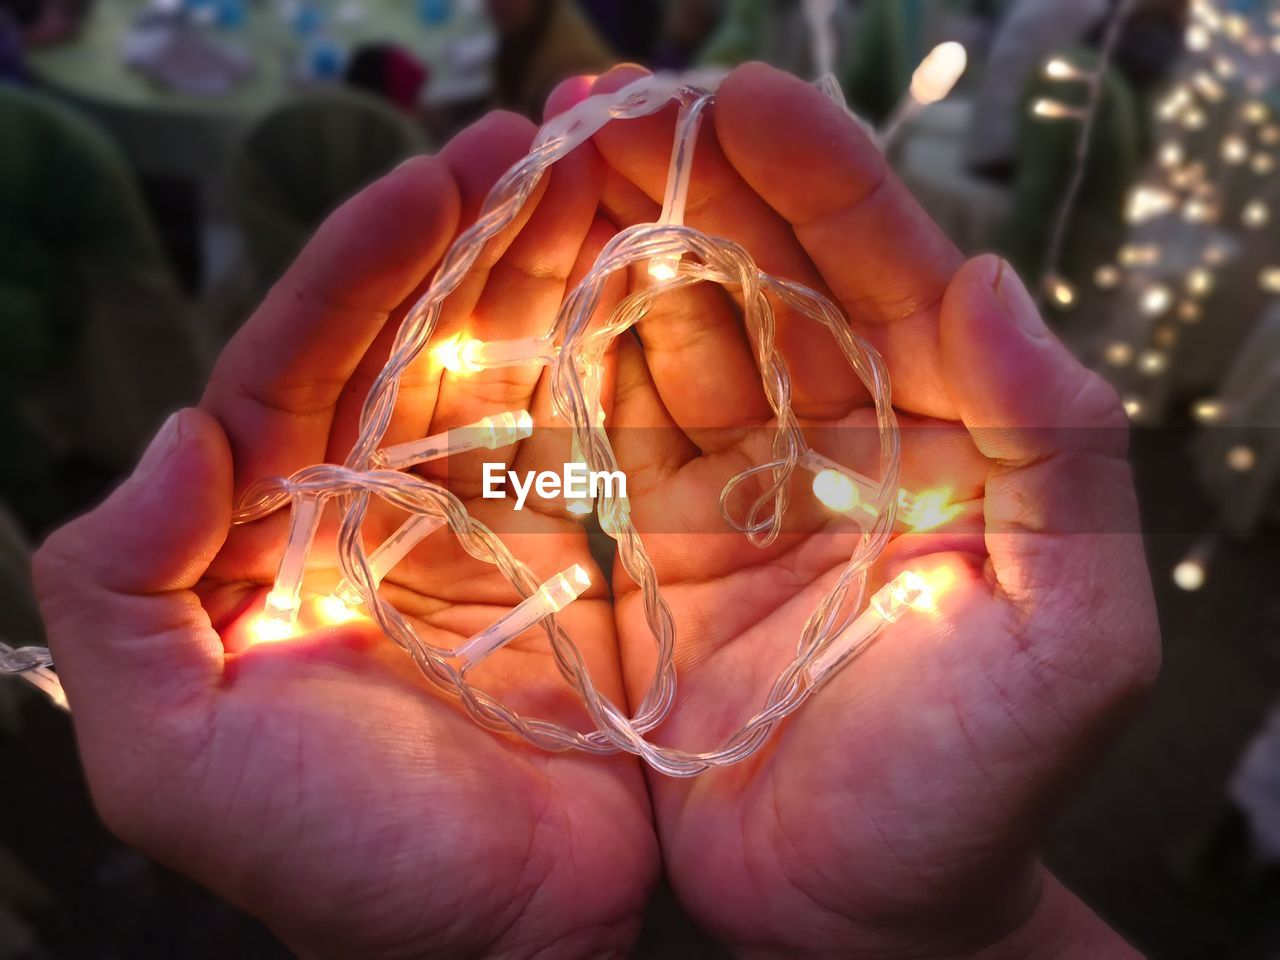 Cropped hands holding illuminated string lights